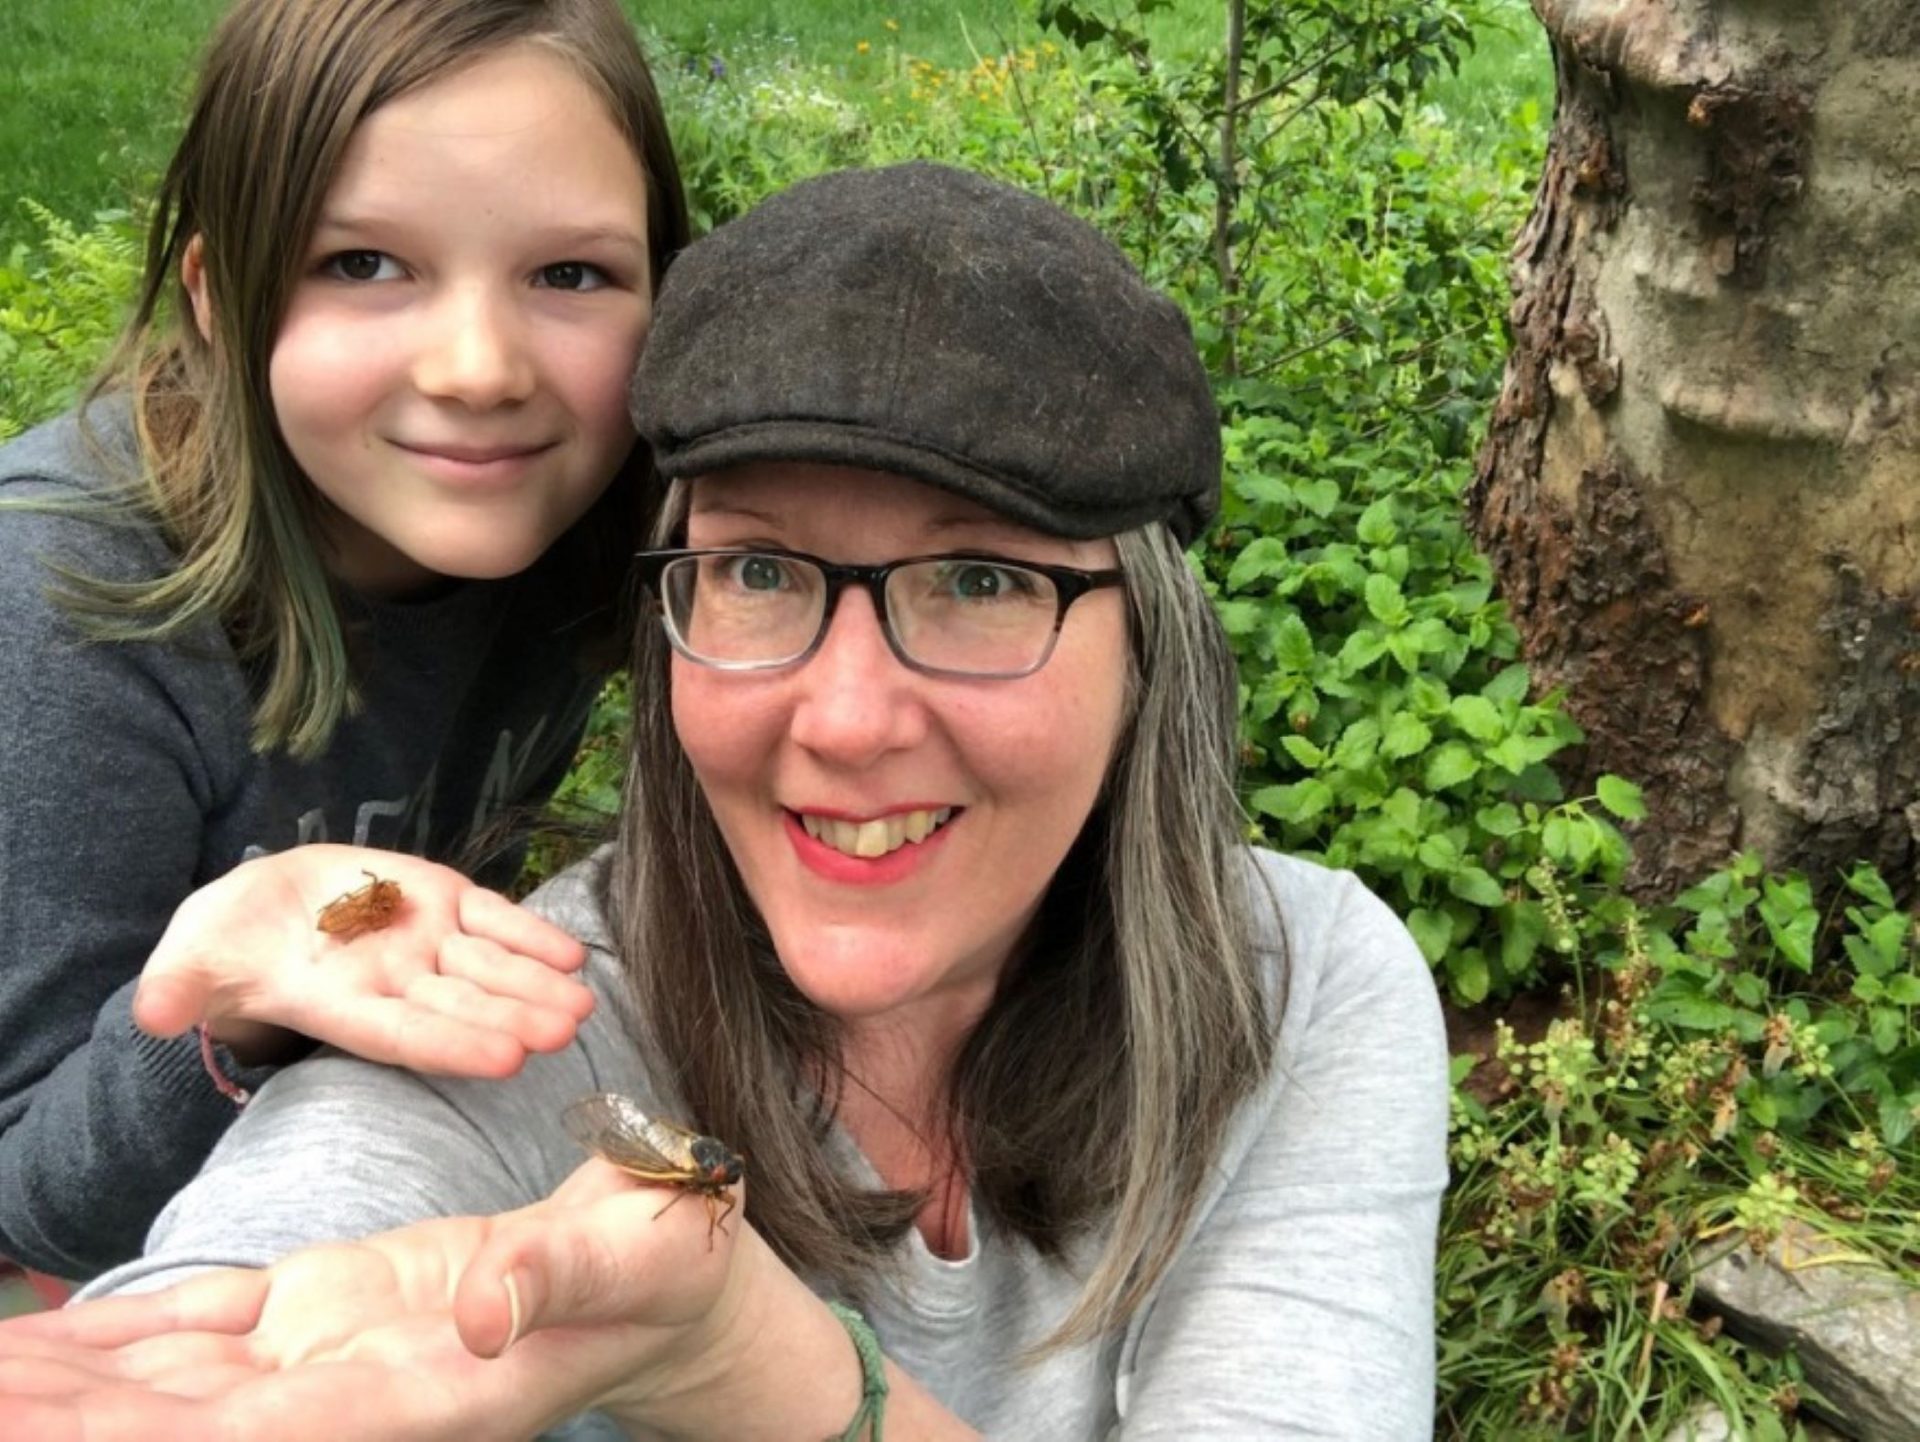 Kathryn Reilly and her daughter Madeline live in Crofton, Maryland where cicadas have emerged in large numbers. They are currently ranked 7th on the Cicada Safari leader board.